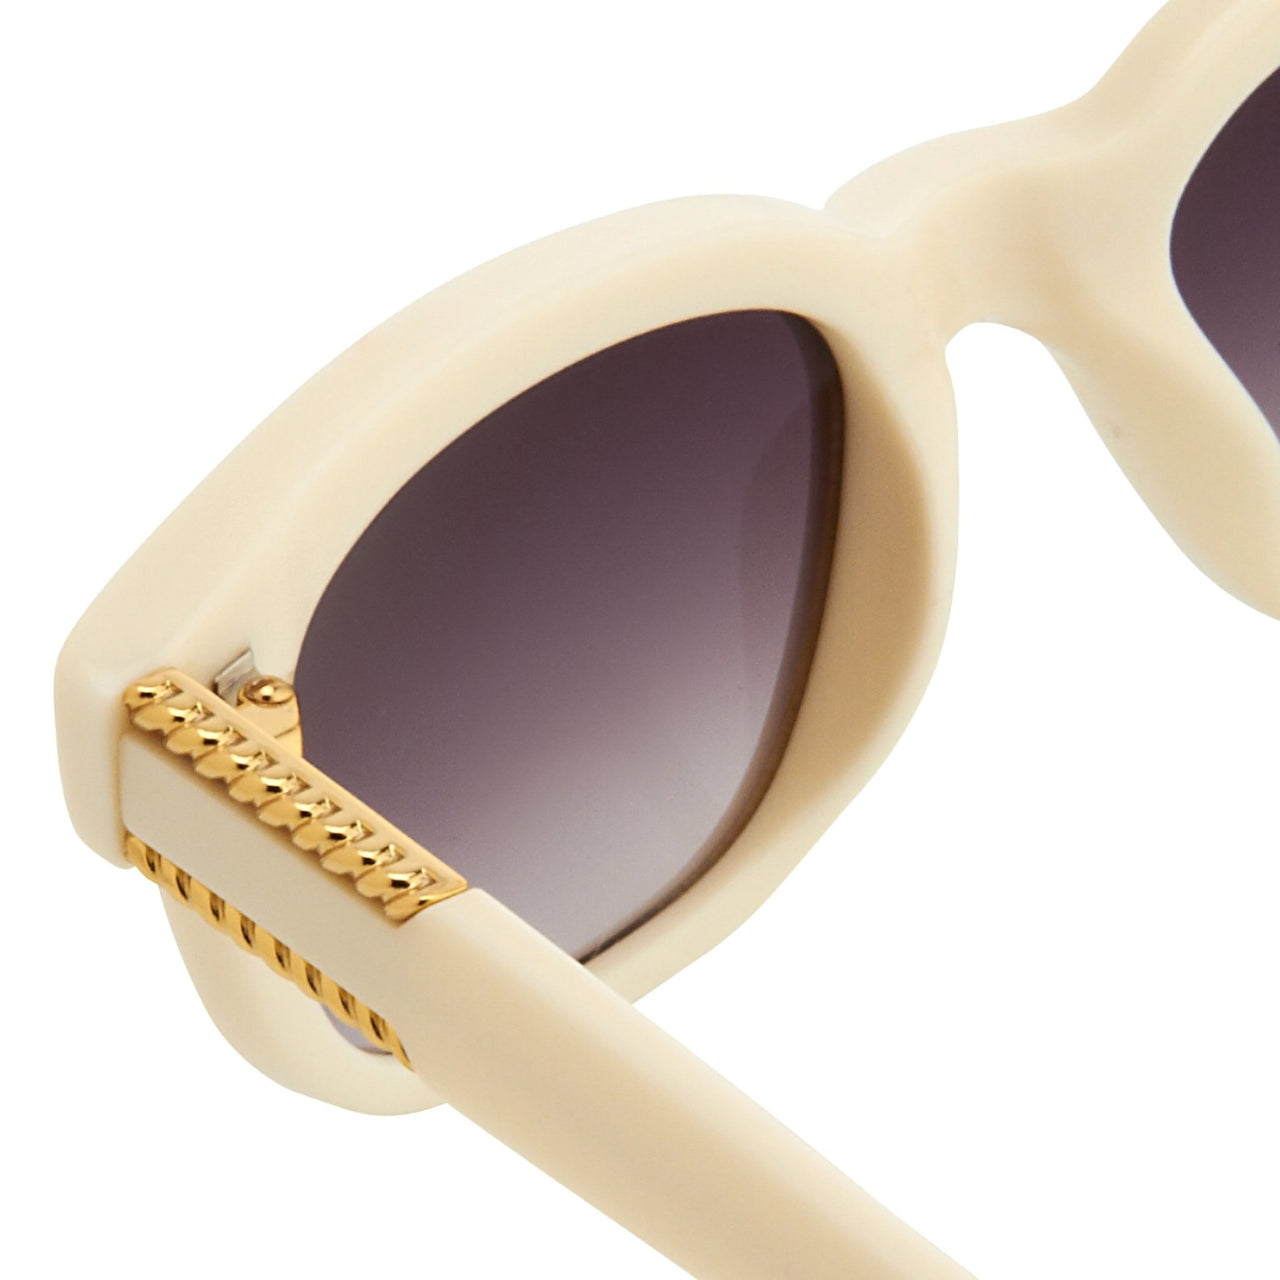 Agent Provocateur Sunglasses Square White and Grey Lenses - AP24C2SUN - Watches & Crystals